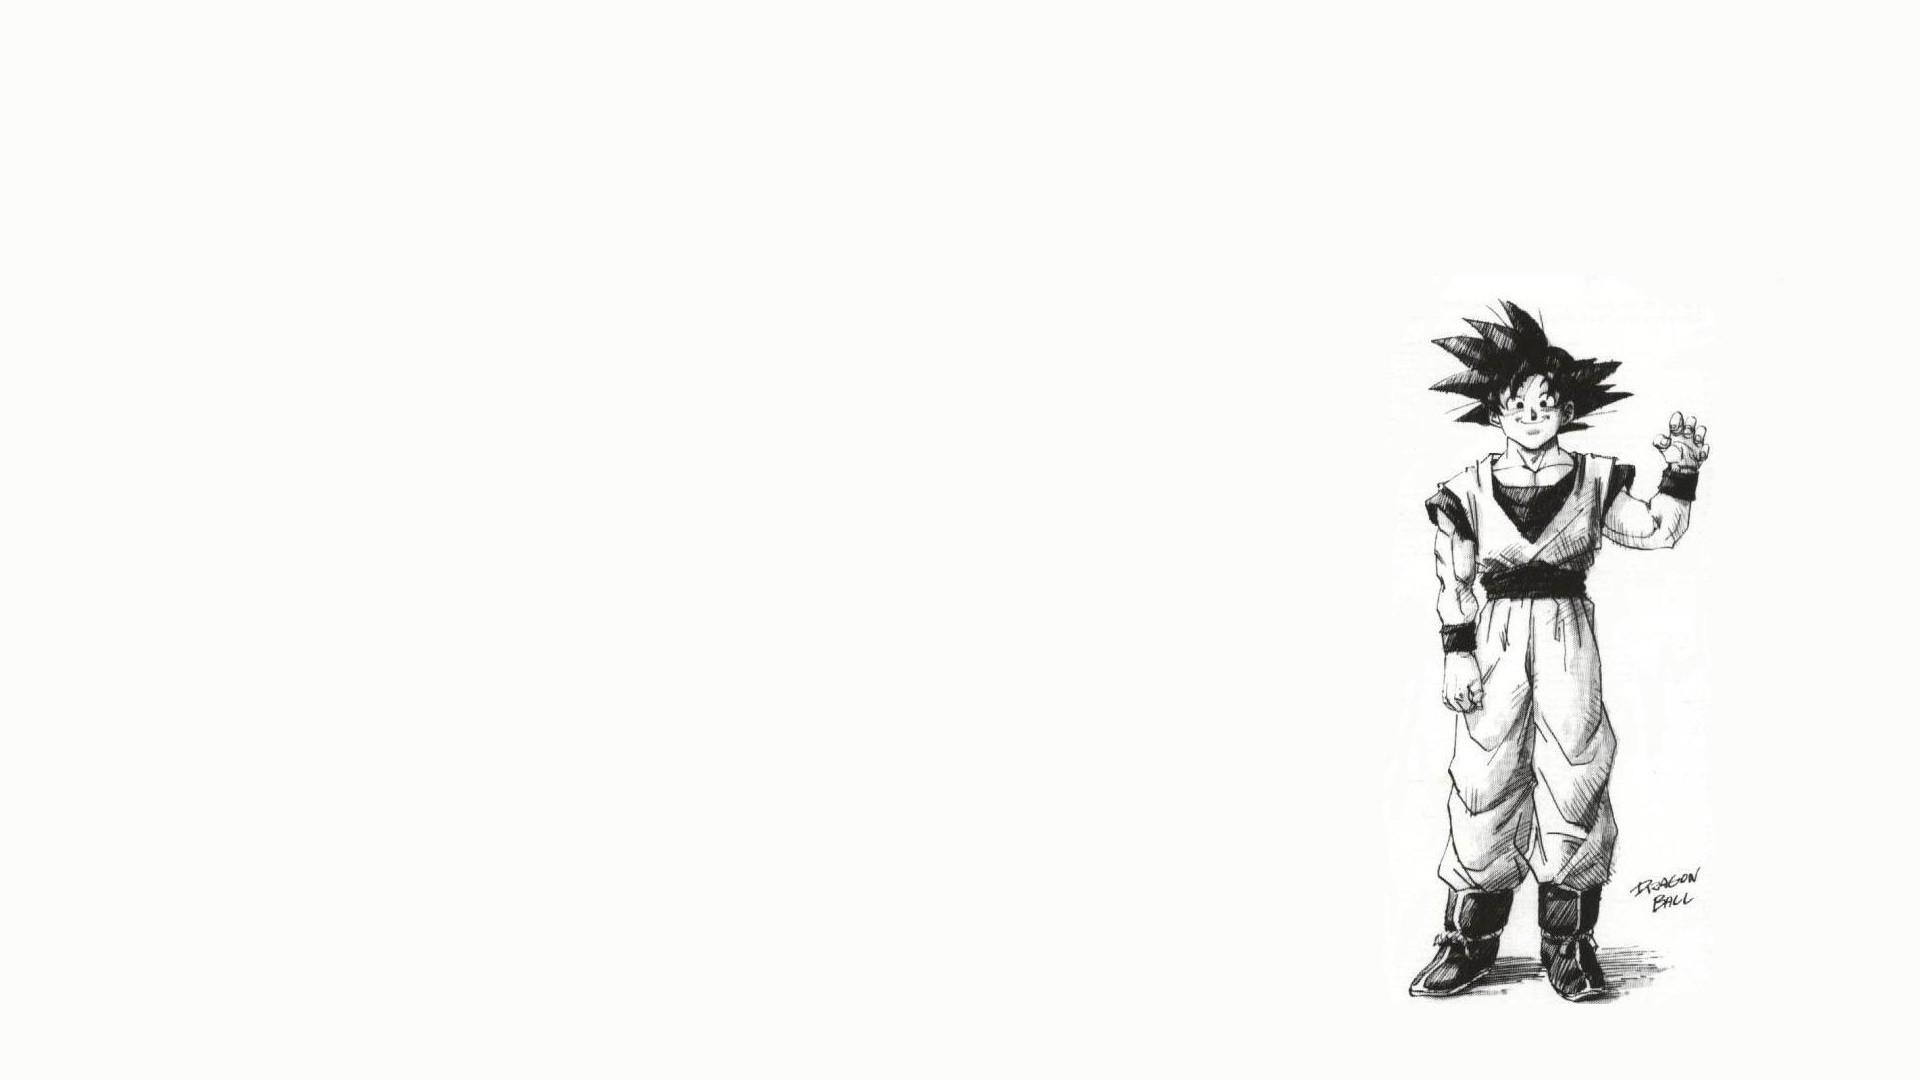 Black And White Goku Wallpapers Top Free Black And White Goku Backgrounds Wallpaperaccess 1350